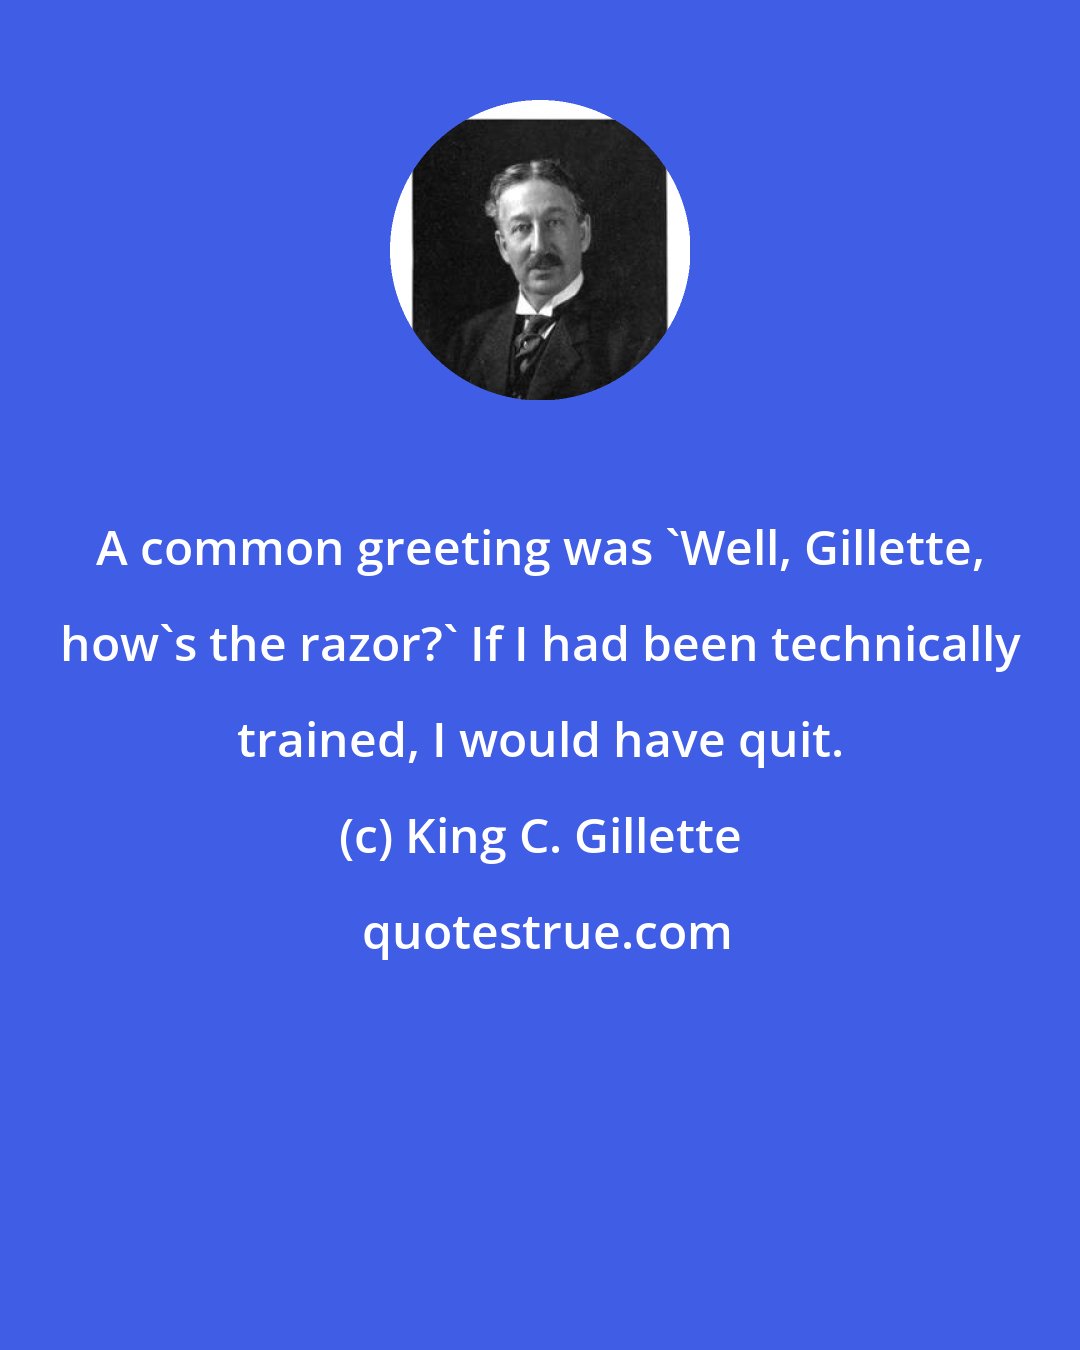 King C. Gillette: A common greeting was 'Well, Gillette, how's the razor?' If I had been technically trained, I would have quit.